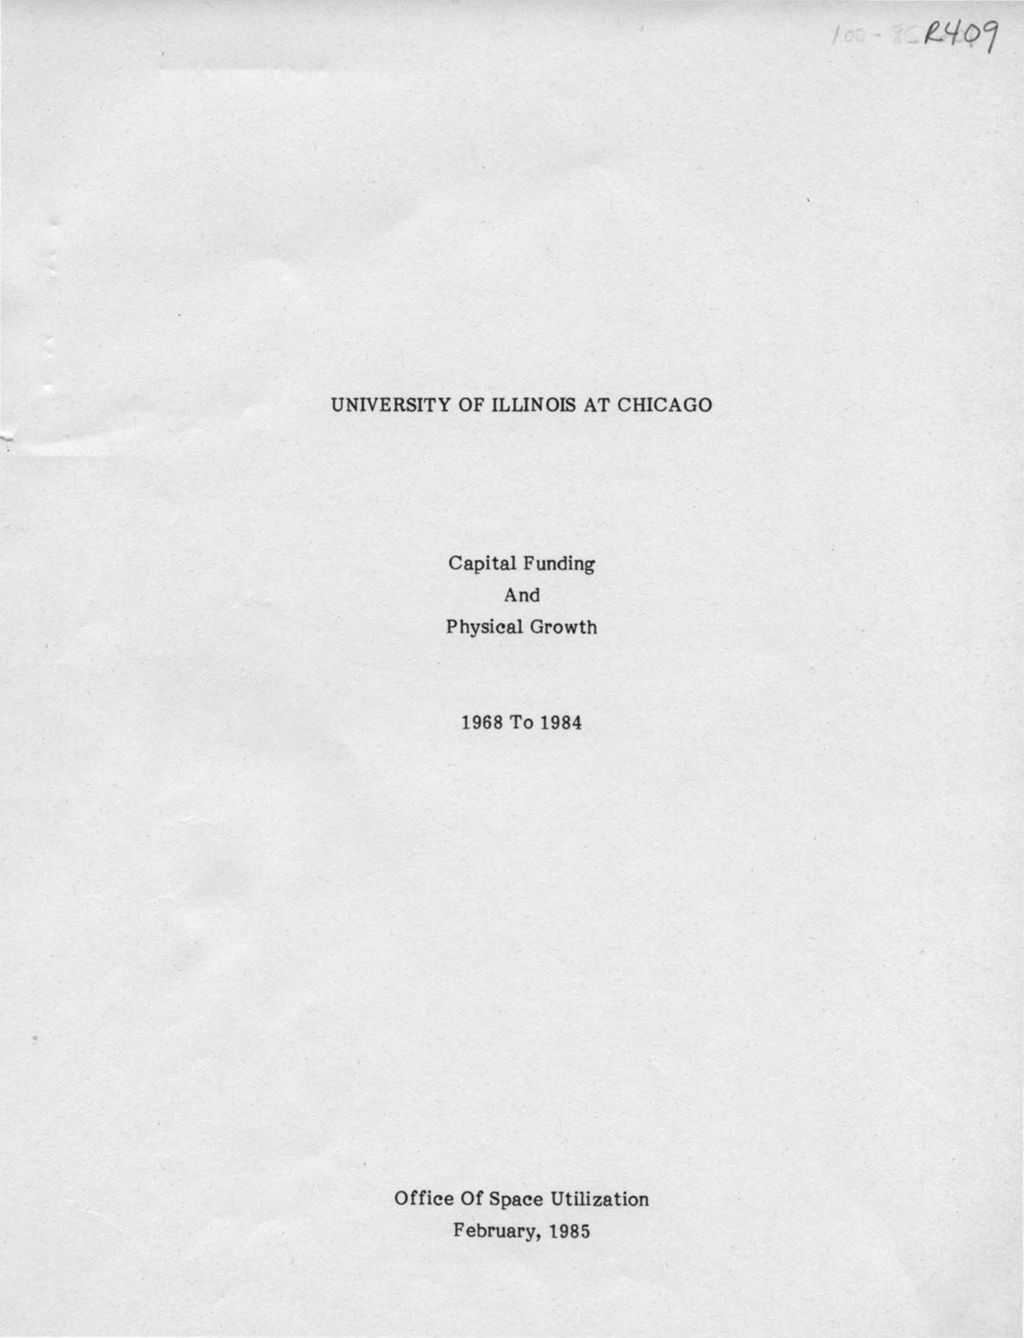 University of Illinois at Chicago, Capital Funding and Physical Growth, 1968 To 1984 (PDF version)